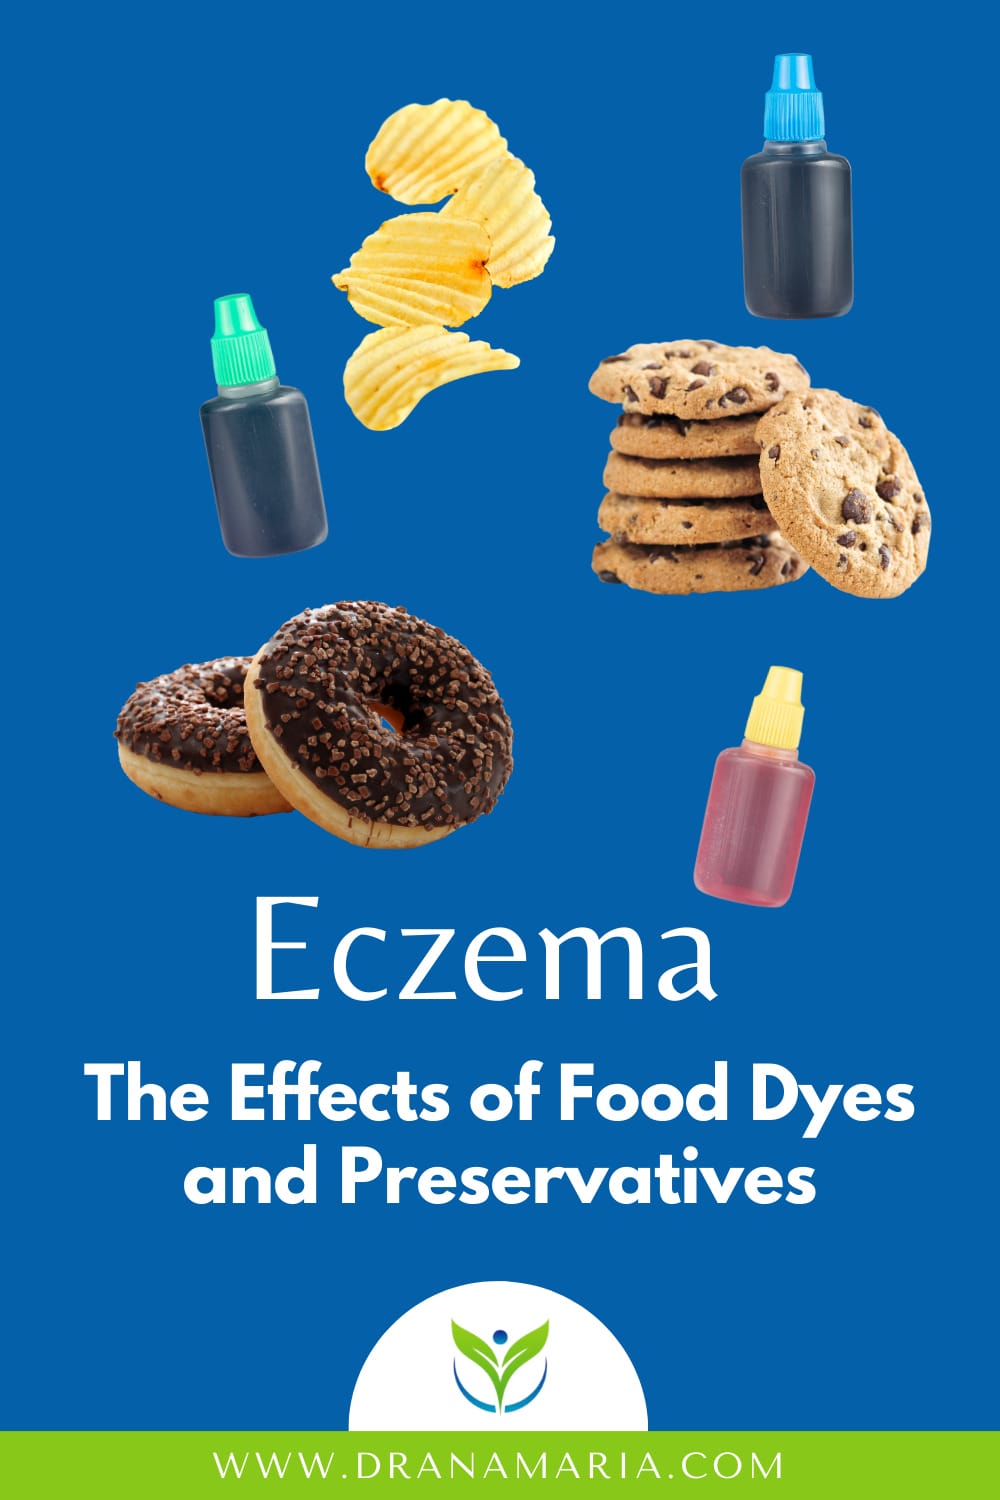 Eczema: The Effects of Food Dyes and Preservatives